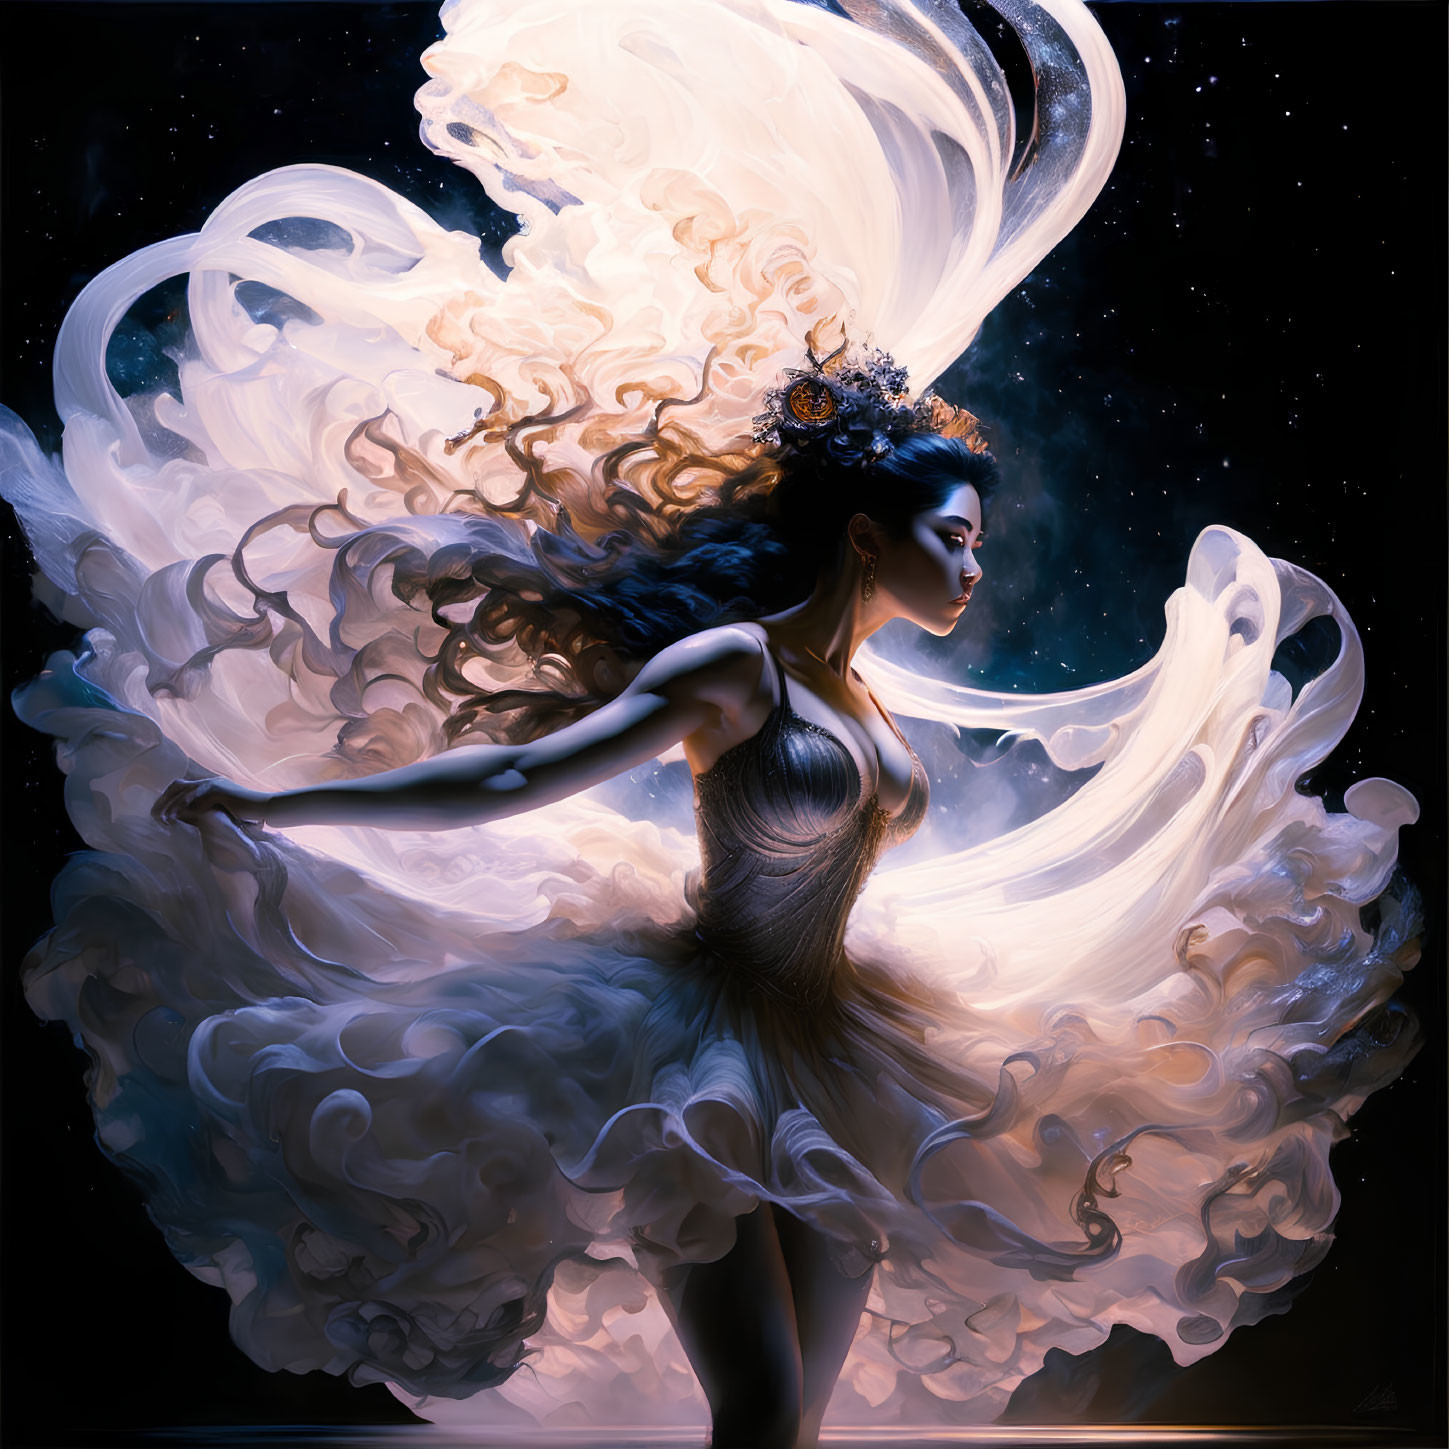 Ethereal woman in flowing gown against starry night sky